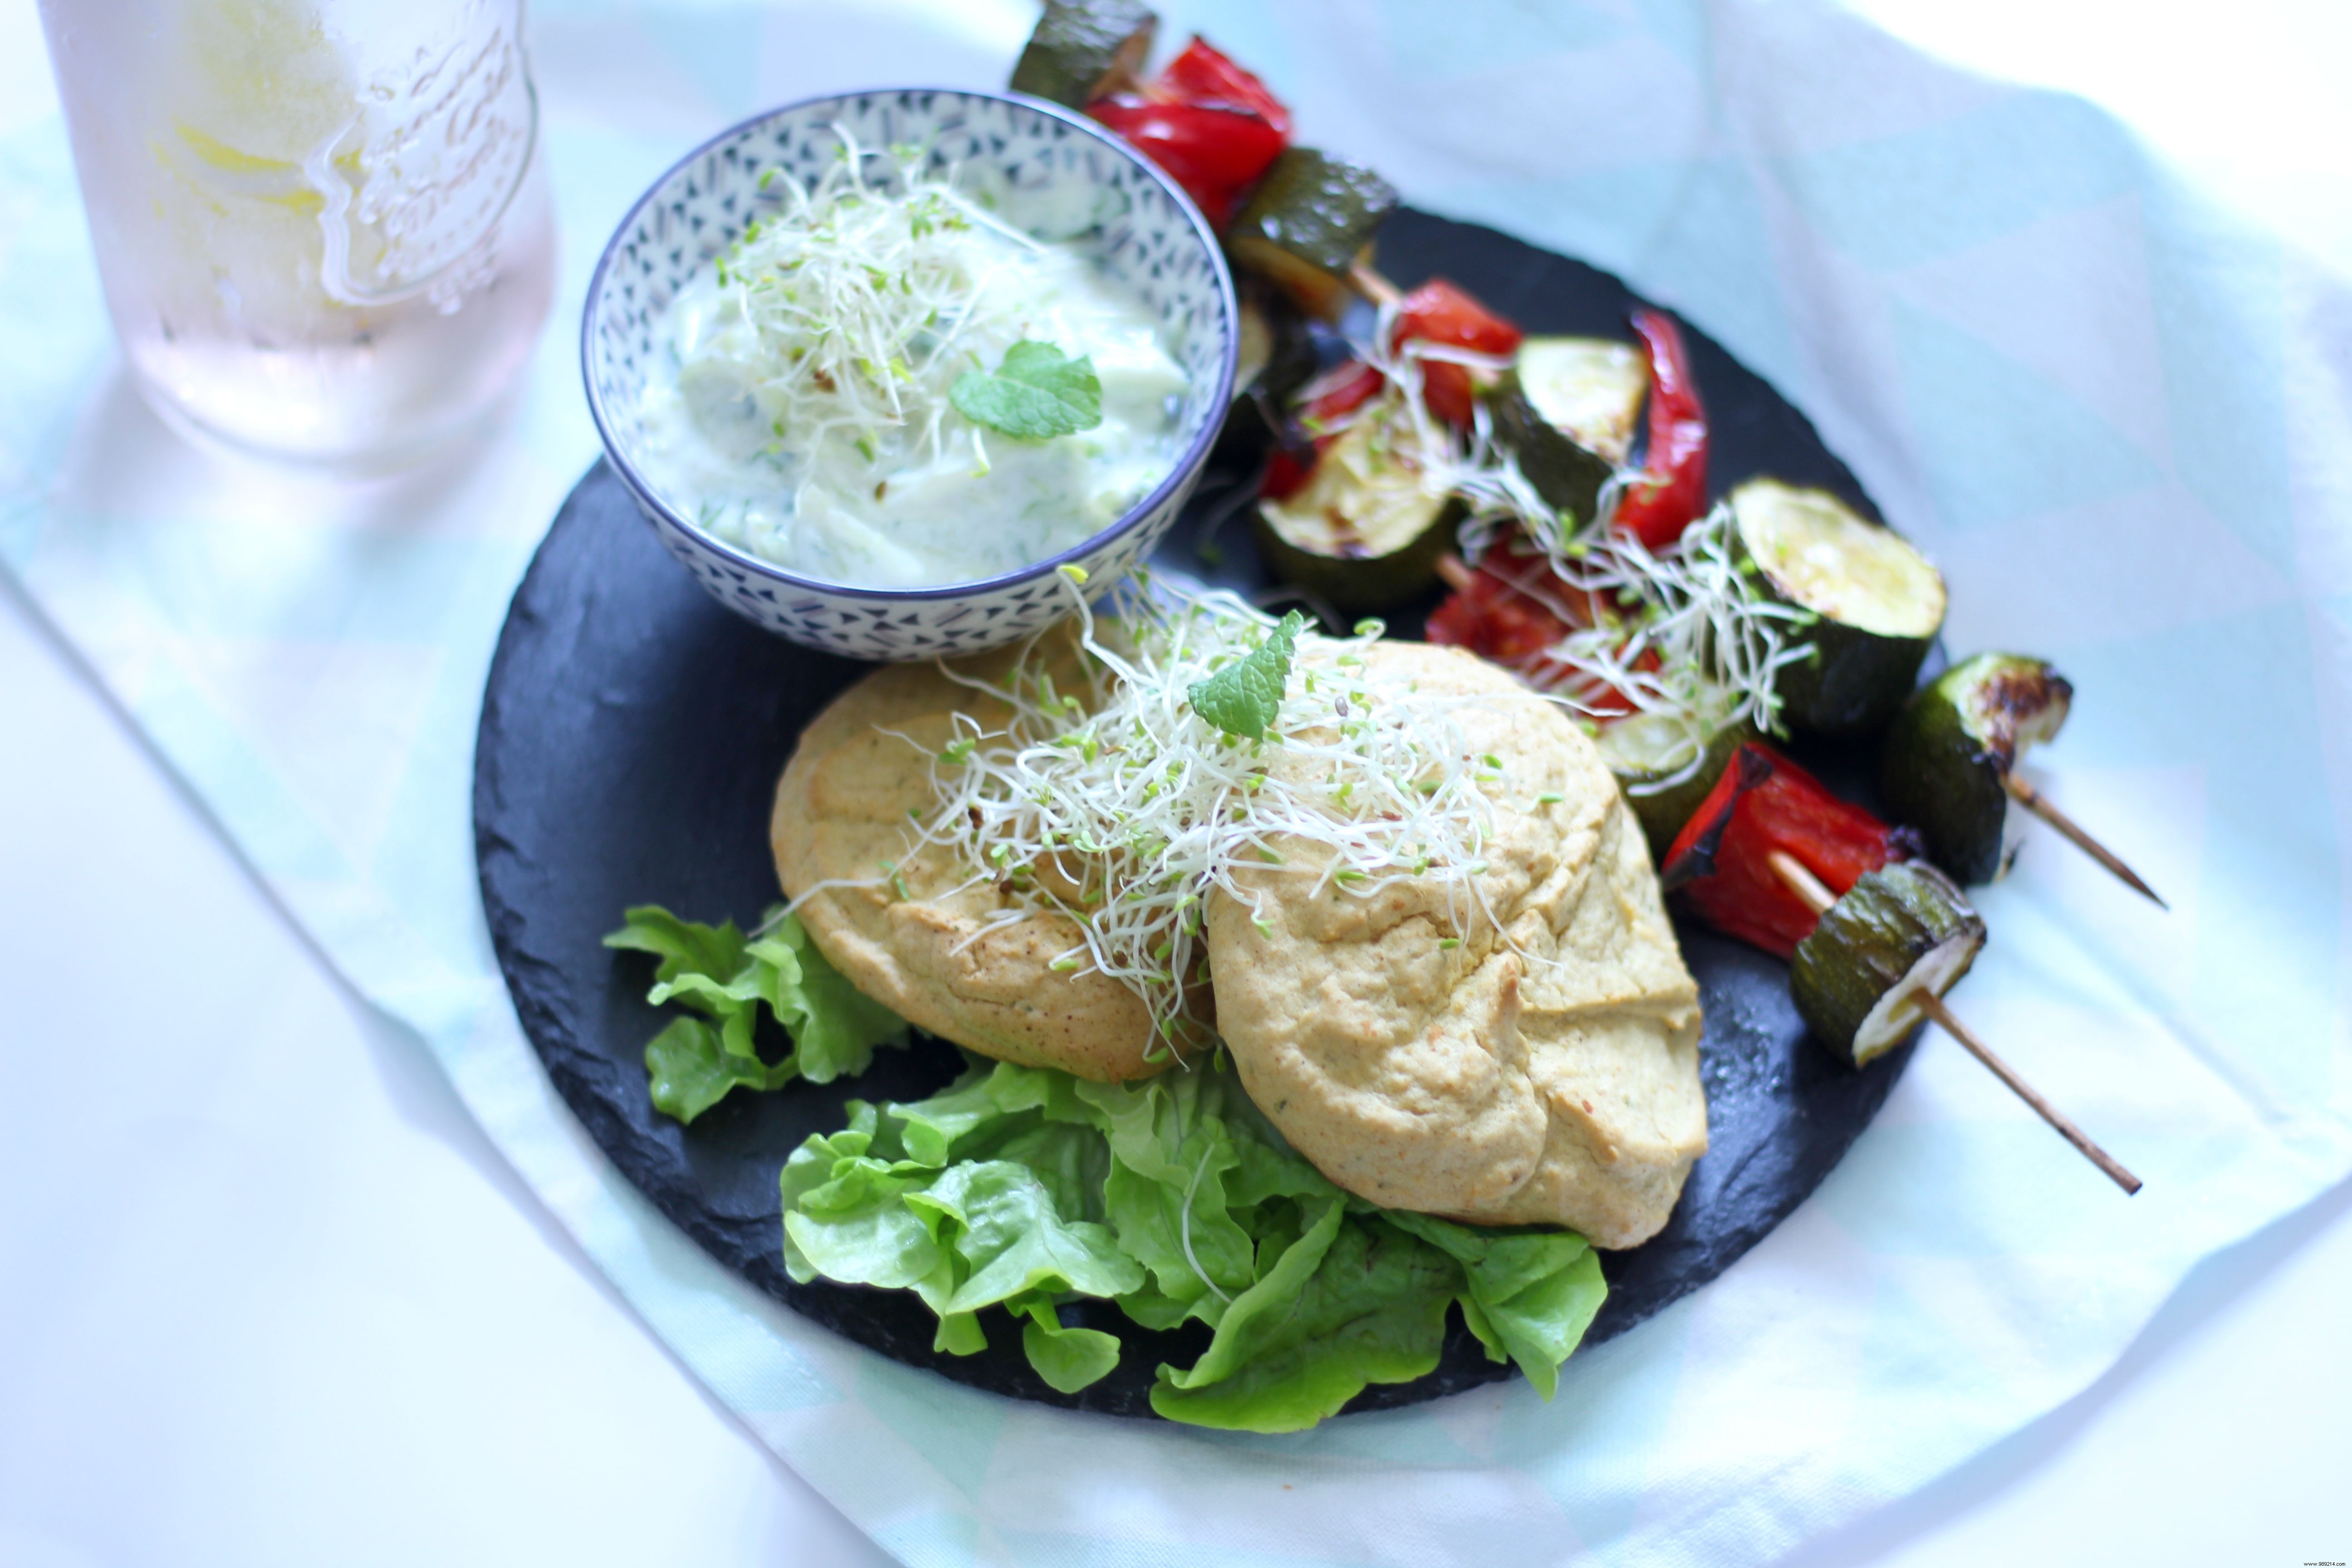 Gluten-free and lactose-free chickpea &vegetable pancakes 